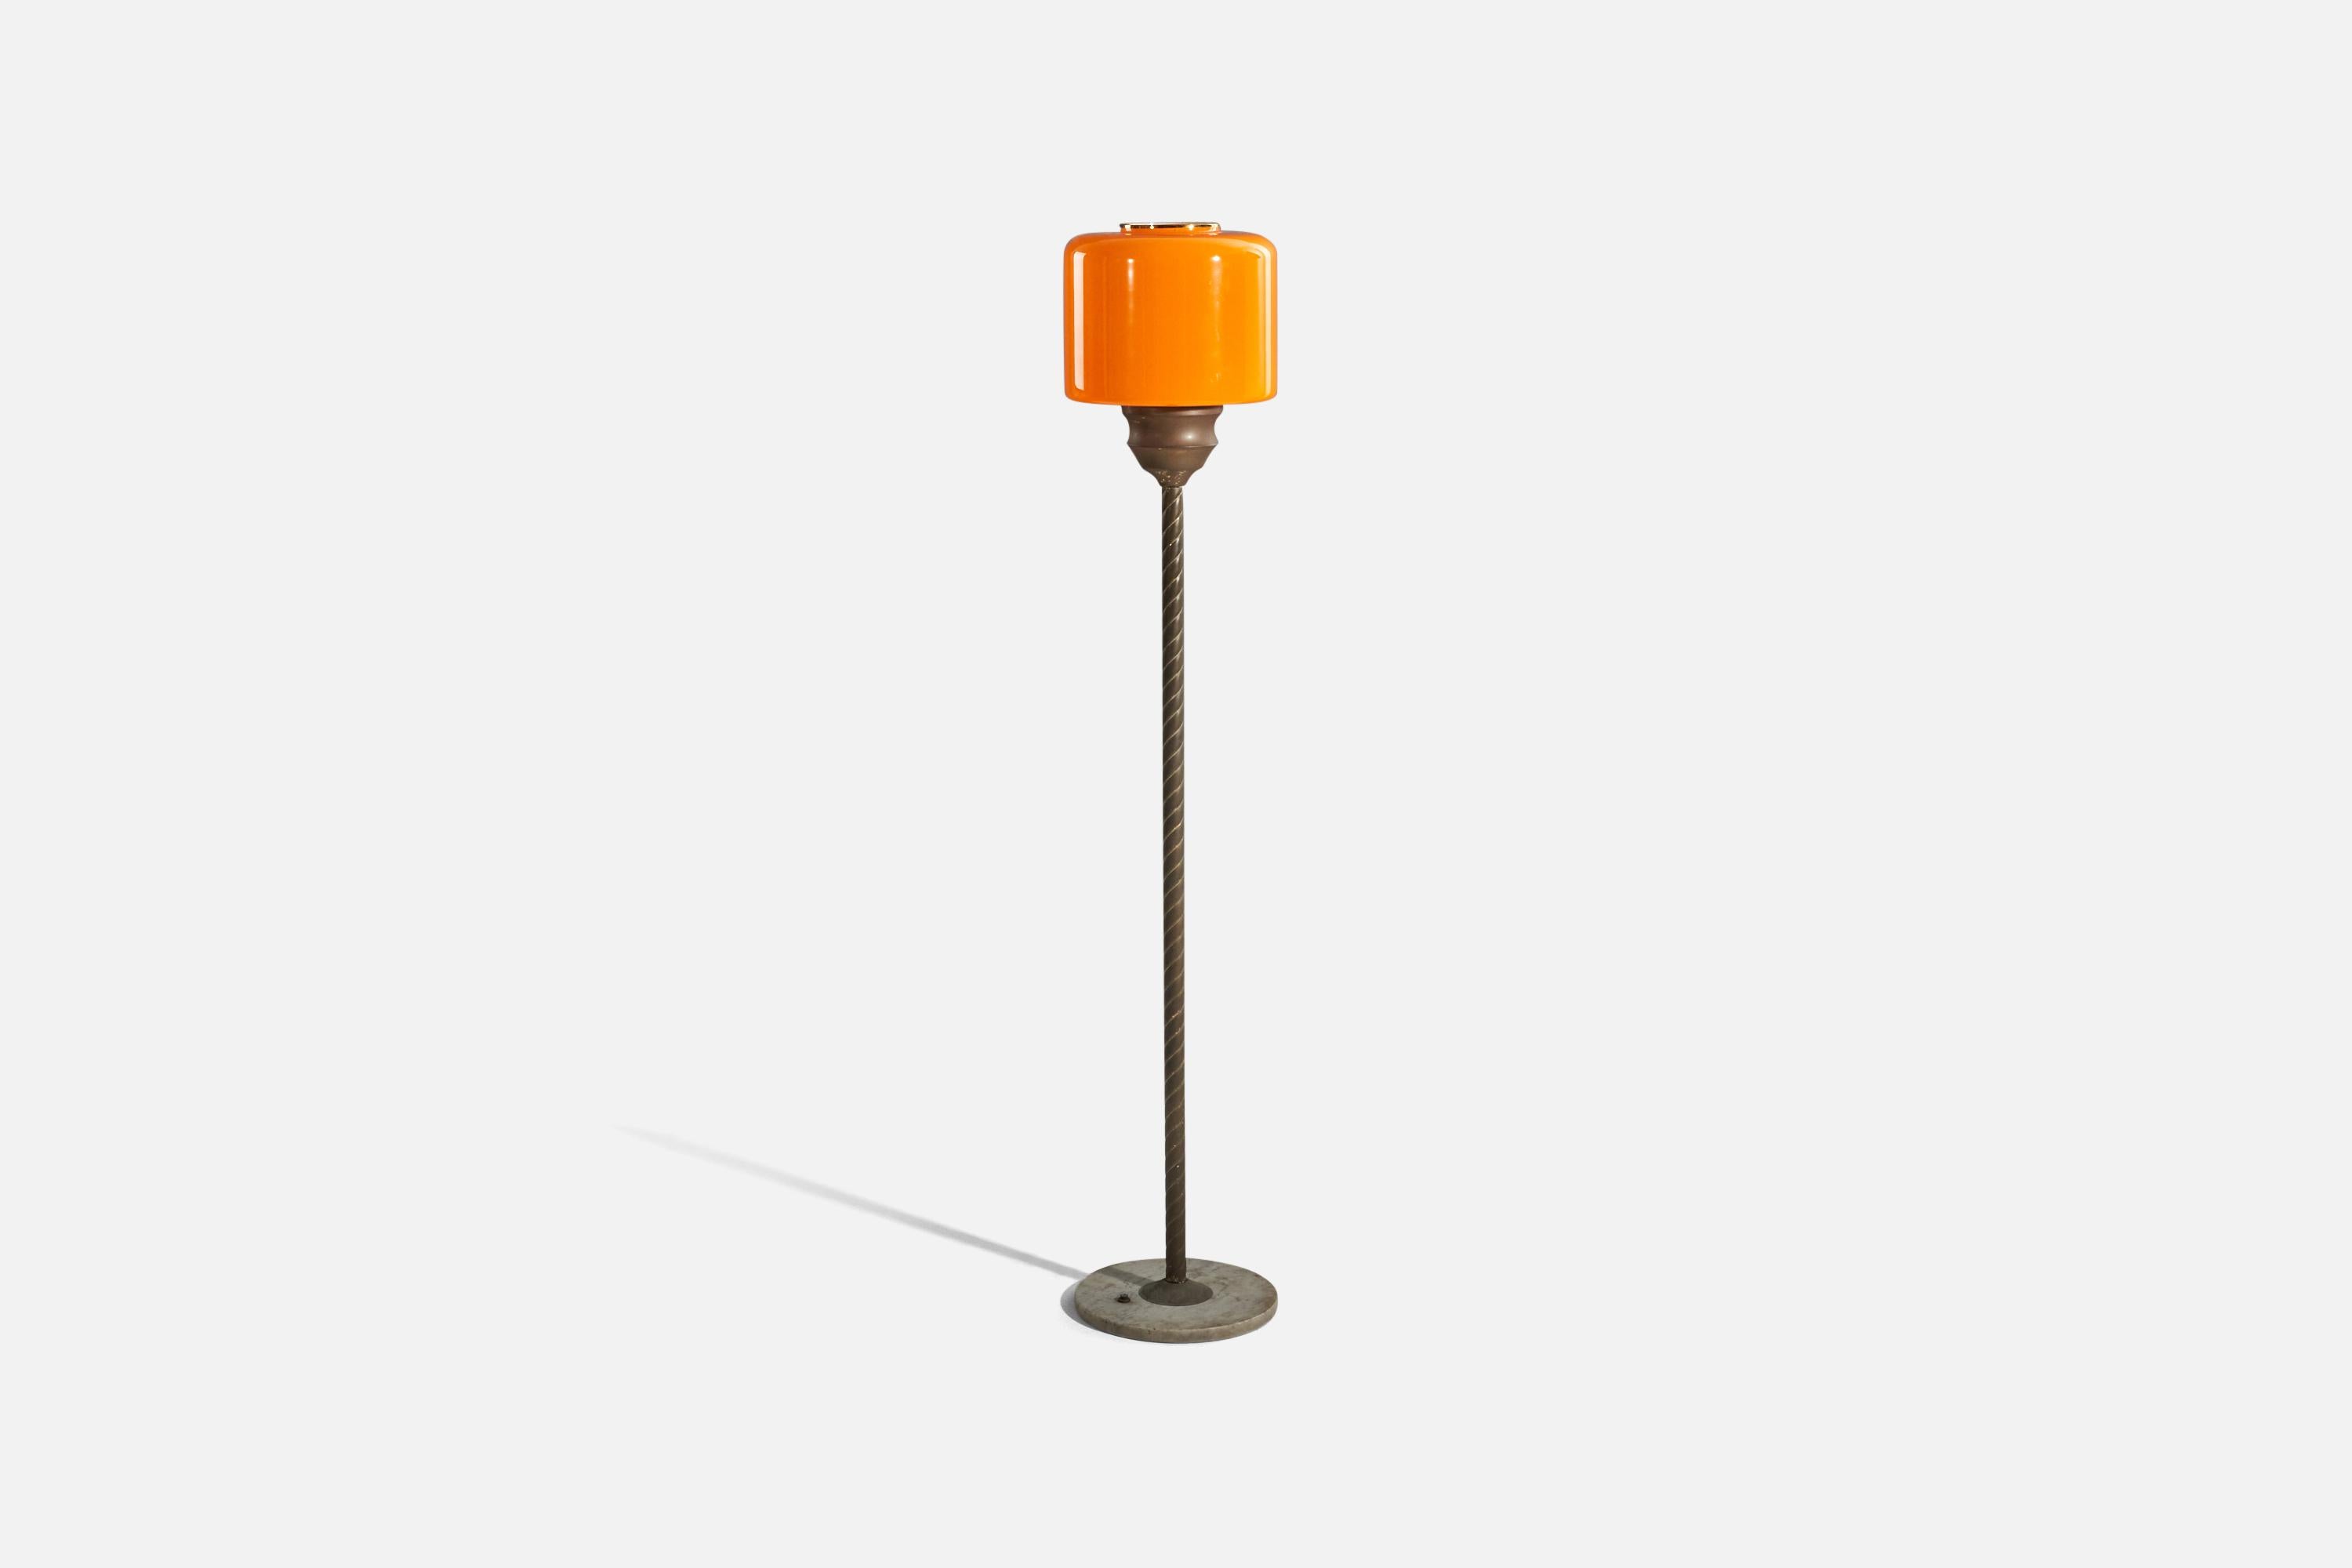 A brass, orange glass and marble adjustable floor lamp designed and produced in Italy, 1940s.

Socket takes standard E-26 medium base bulb.
There is no maximum wattage stated on the fixture.